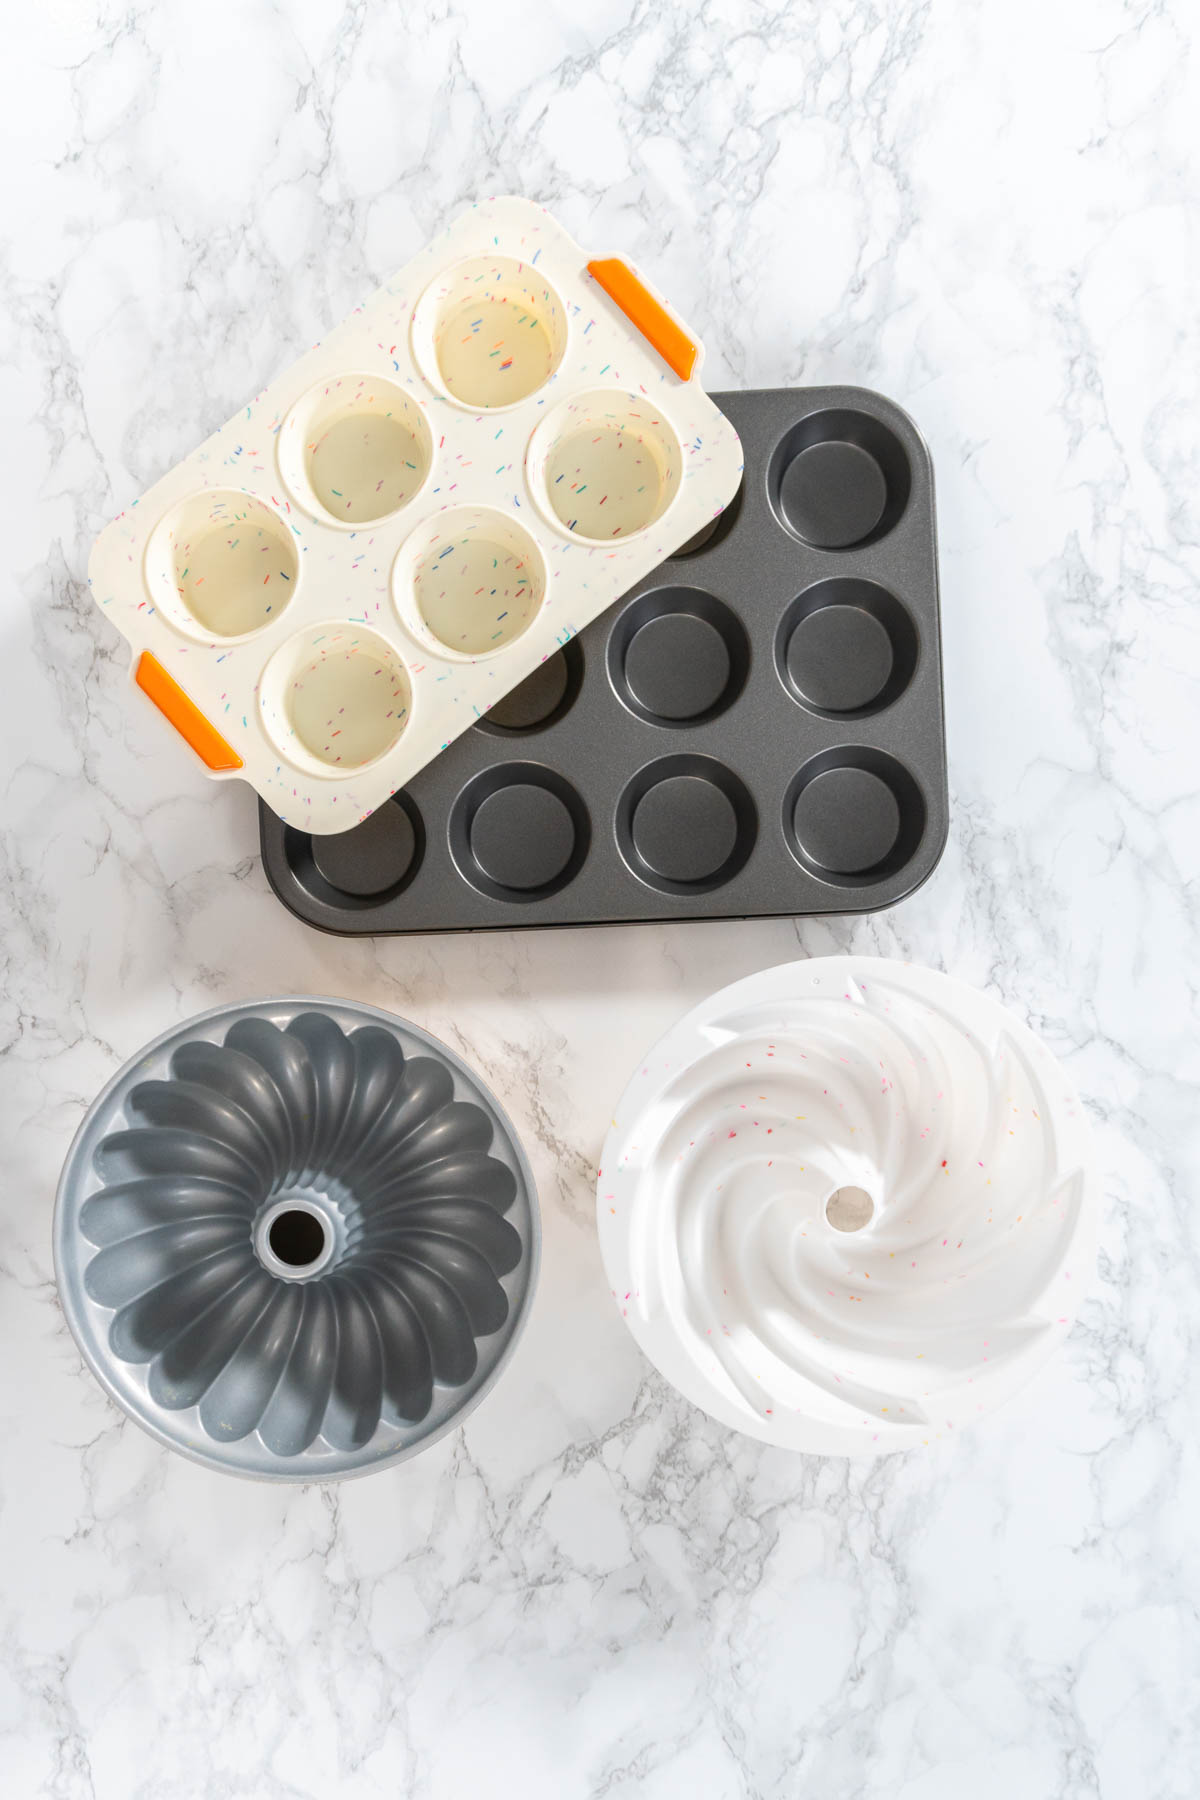 My Easy Steps to Preparing Silicone Baking Molds for the Oven